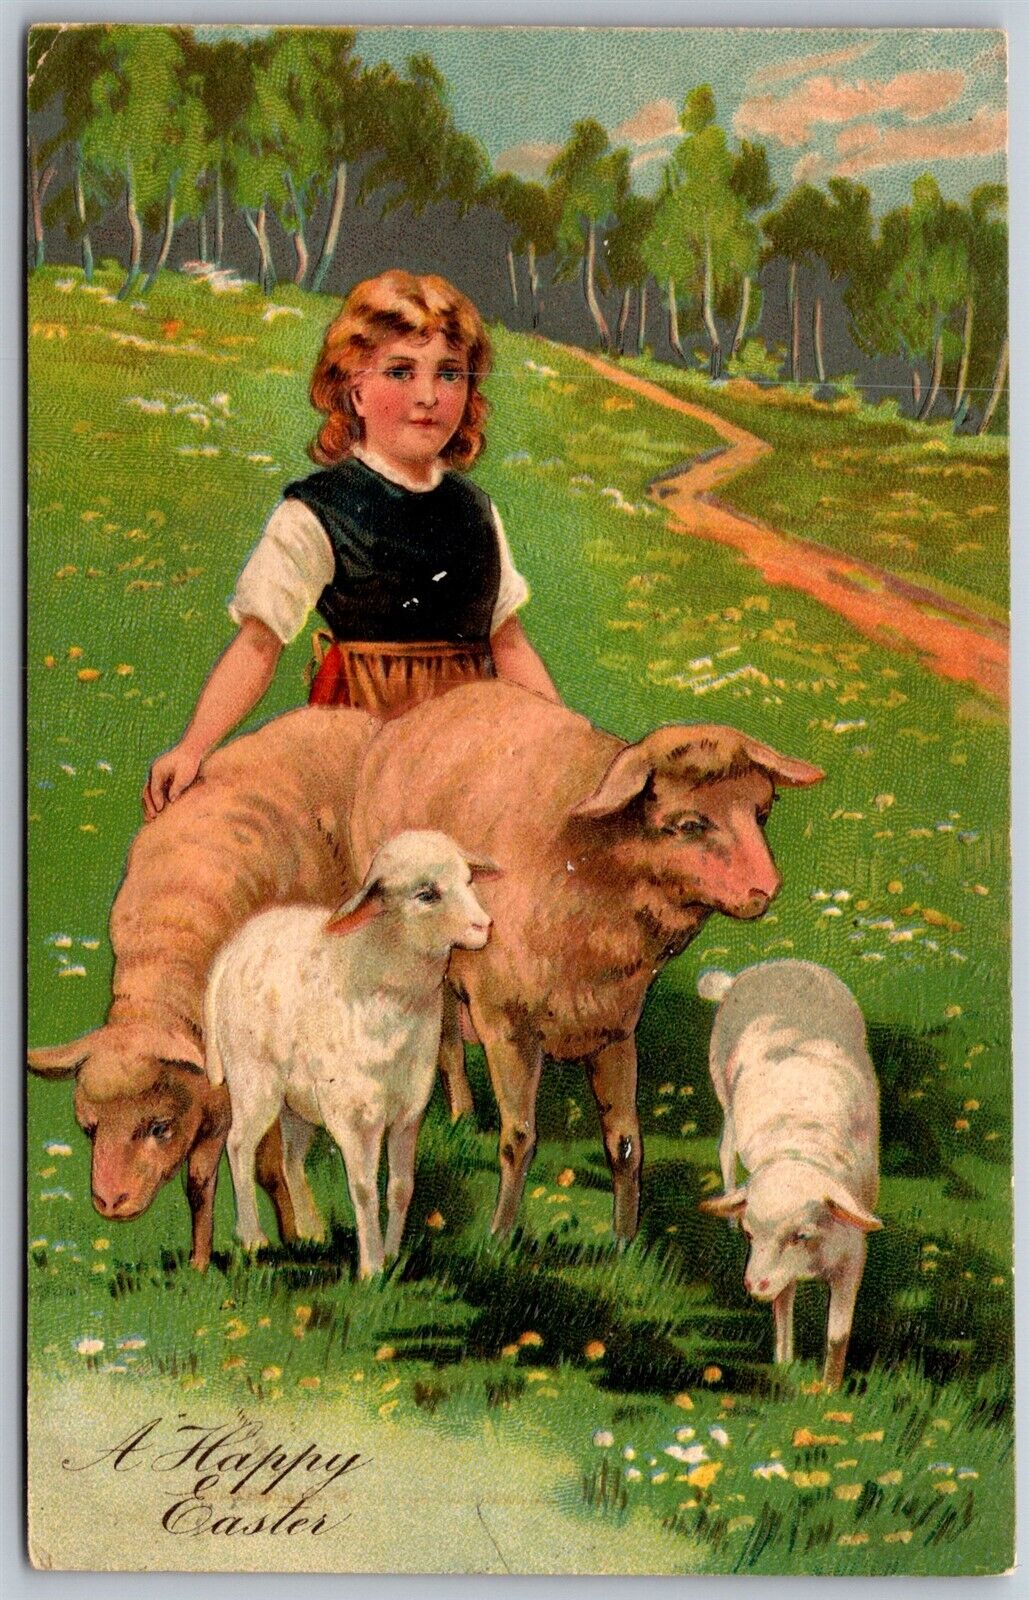 Vtg Happy Easter Greetings Victorian Girl With Lambs Sheep 1910s PFB Postcard